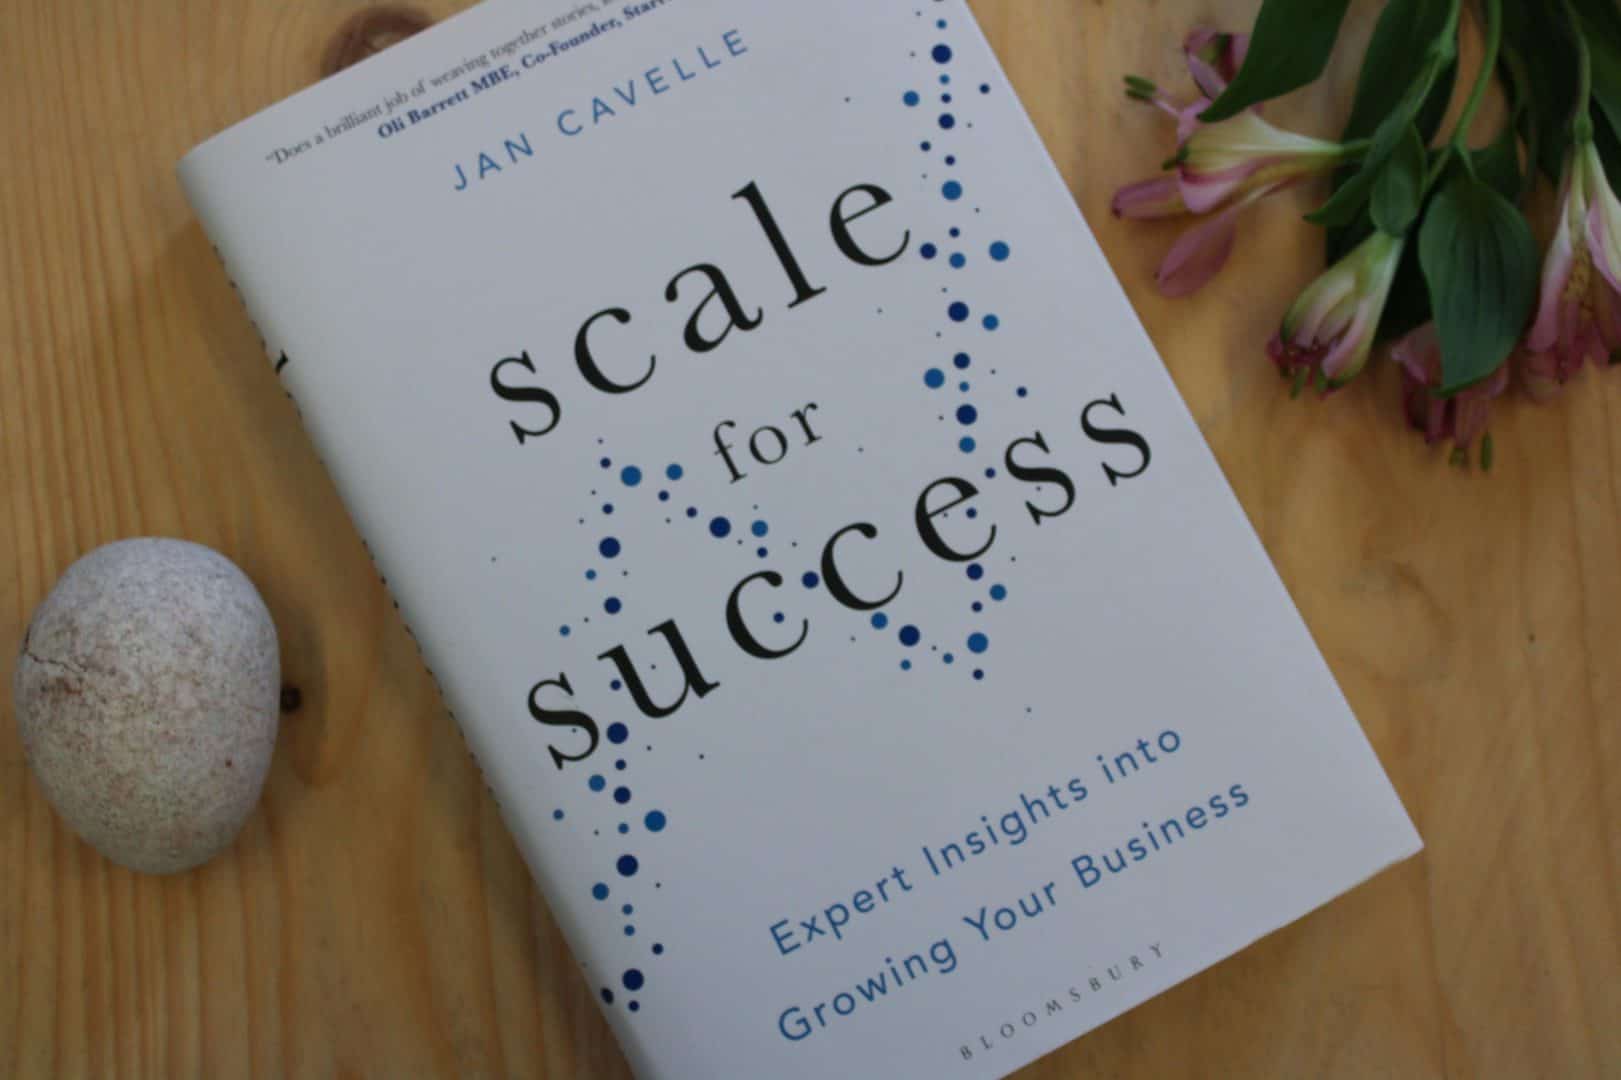 Why Writing “Scale for Success” was wonderful